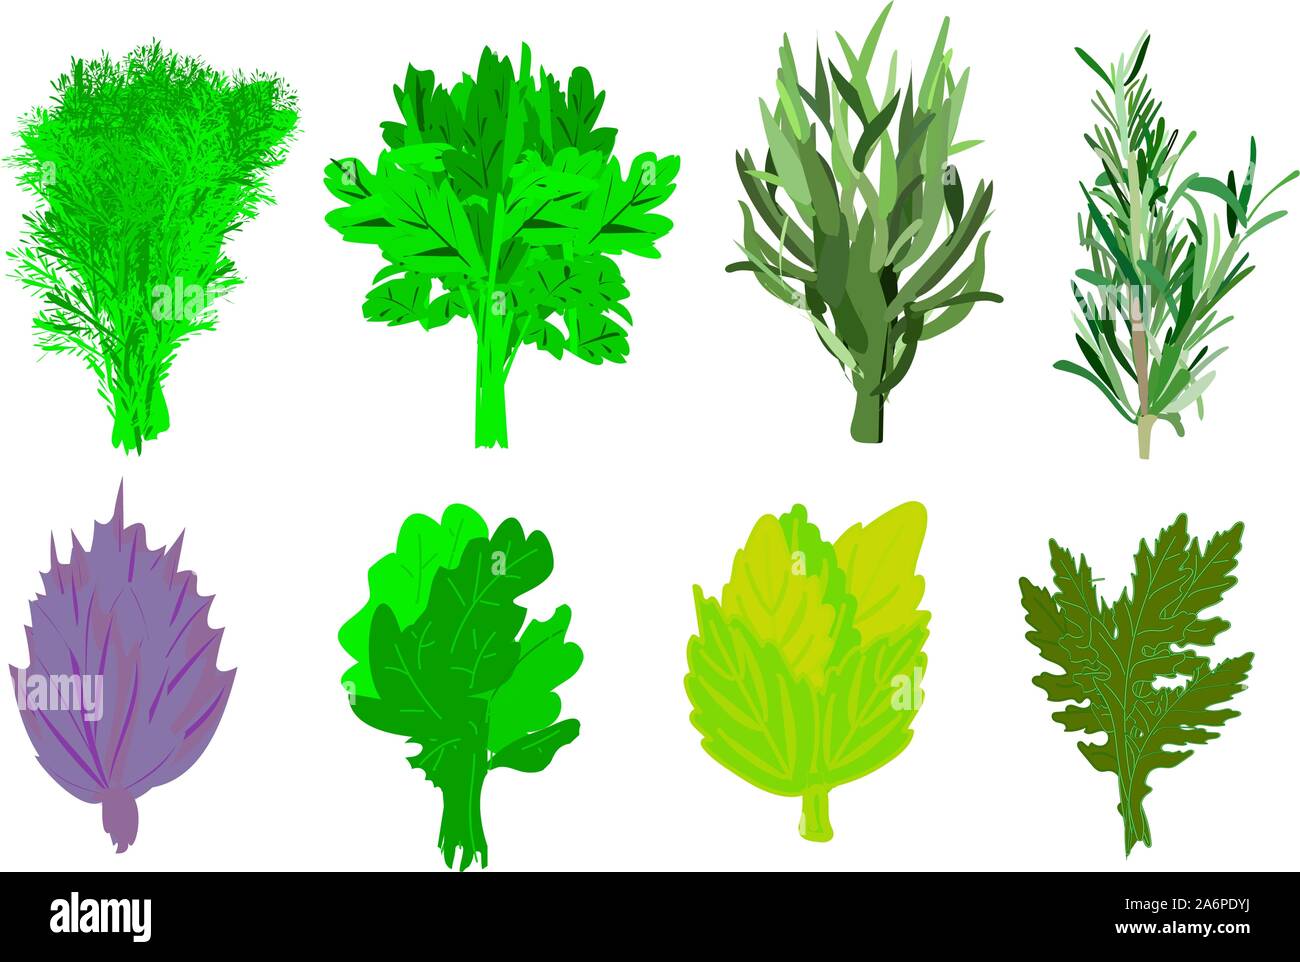 spicy herbs and herbs. Dill, parsley, ruccola and basil, Thyme and thyme. Lemon mint. Sprigs of kitchen greens isolated on white background. vector Stock Vector